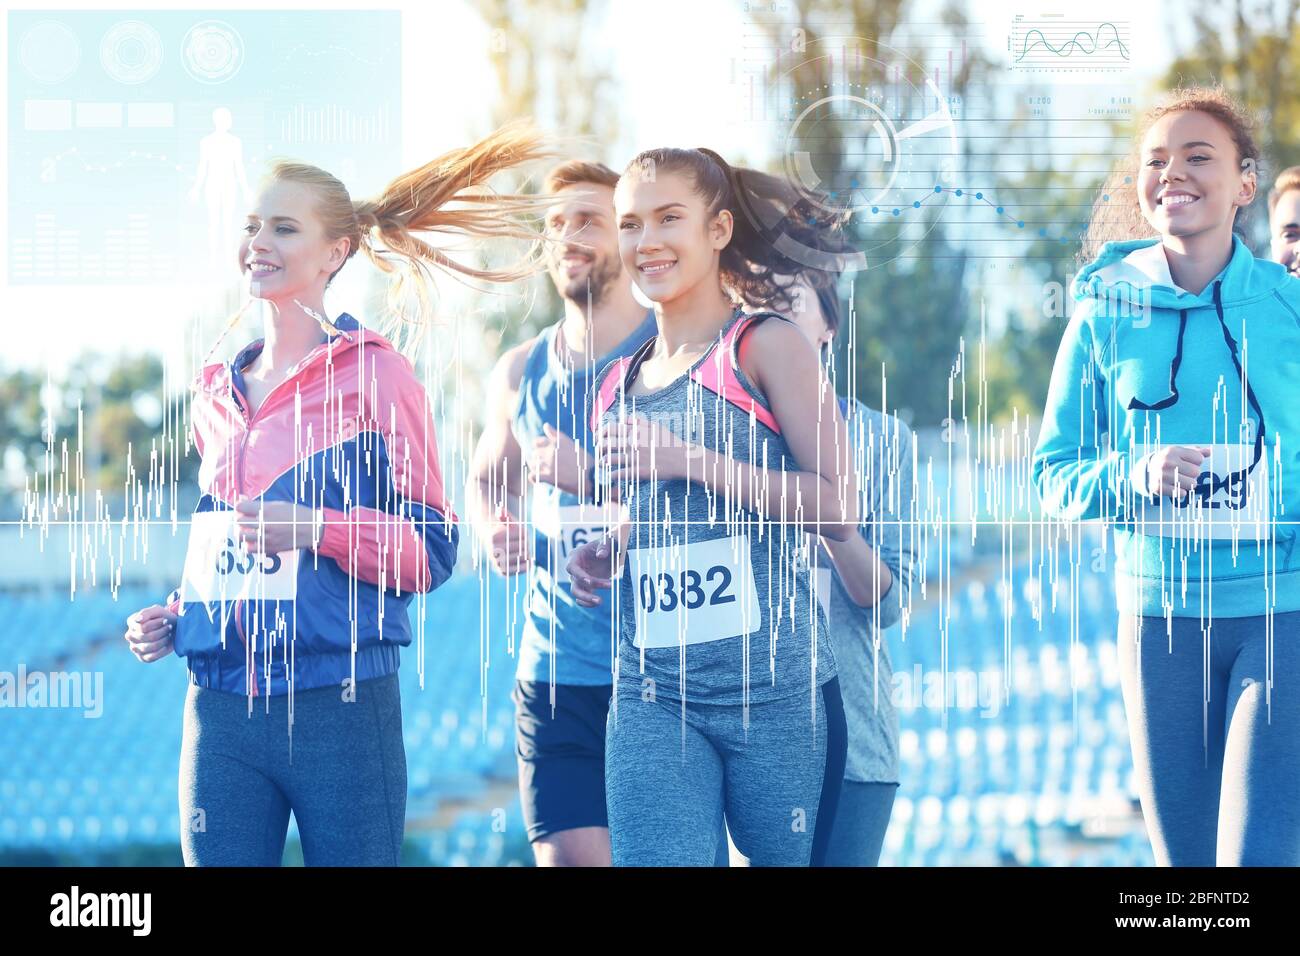 Heart rate monitor concept. Young people running at stadium Stock Photo